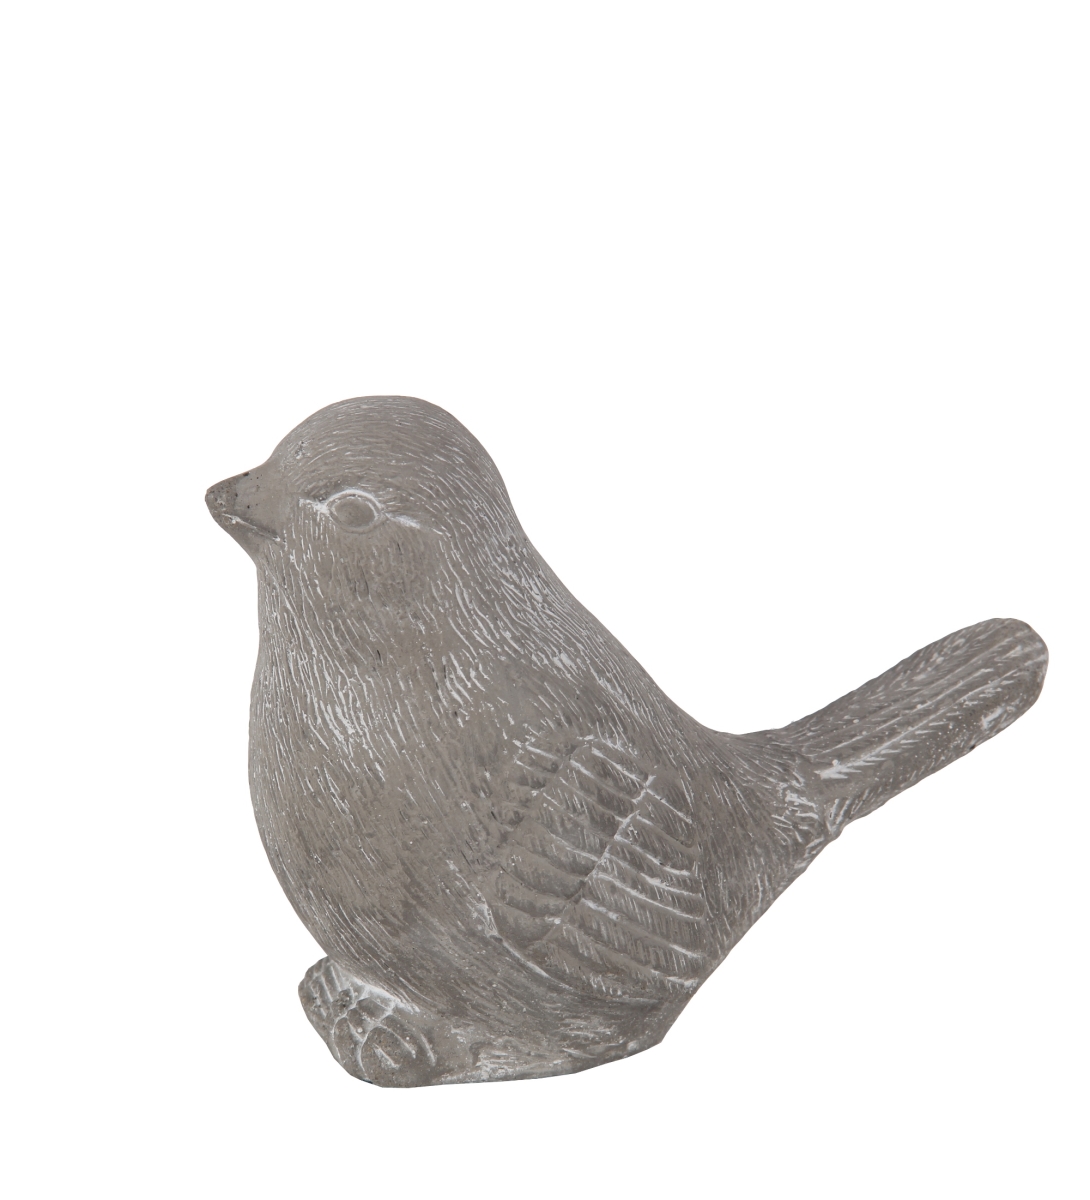 007-00015 7 X 4 X 5.5 In. Traditional Cement Bird With Head Up, Grey